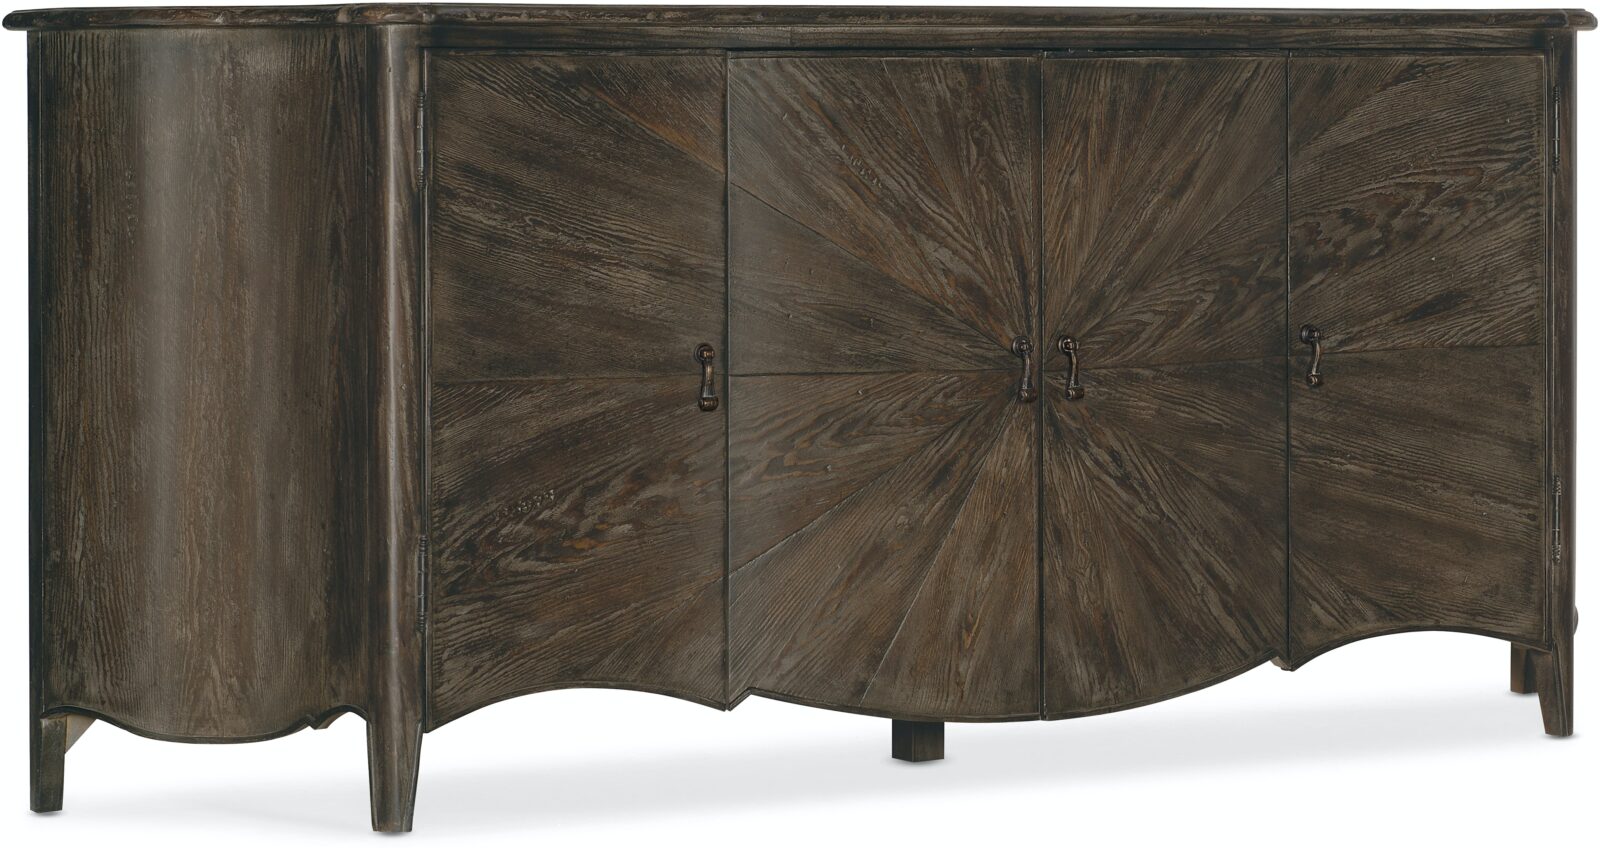 Traditions Entertainment console